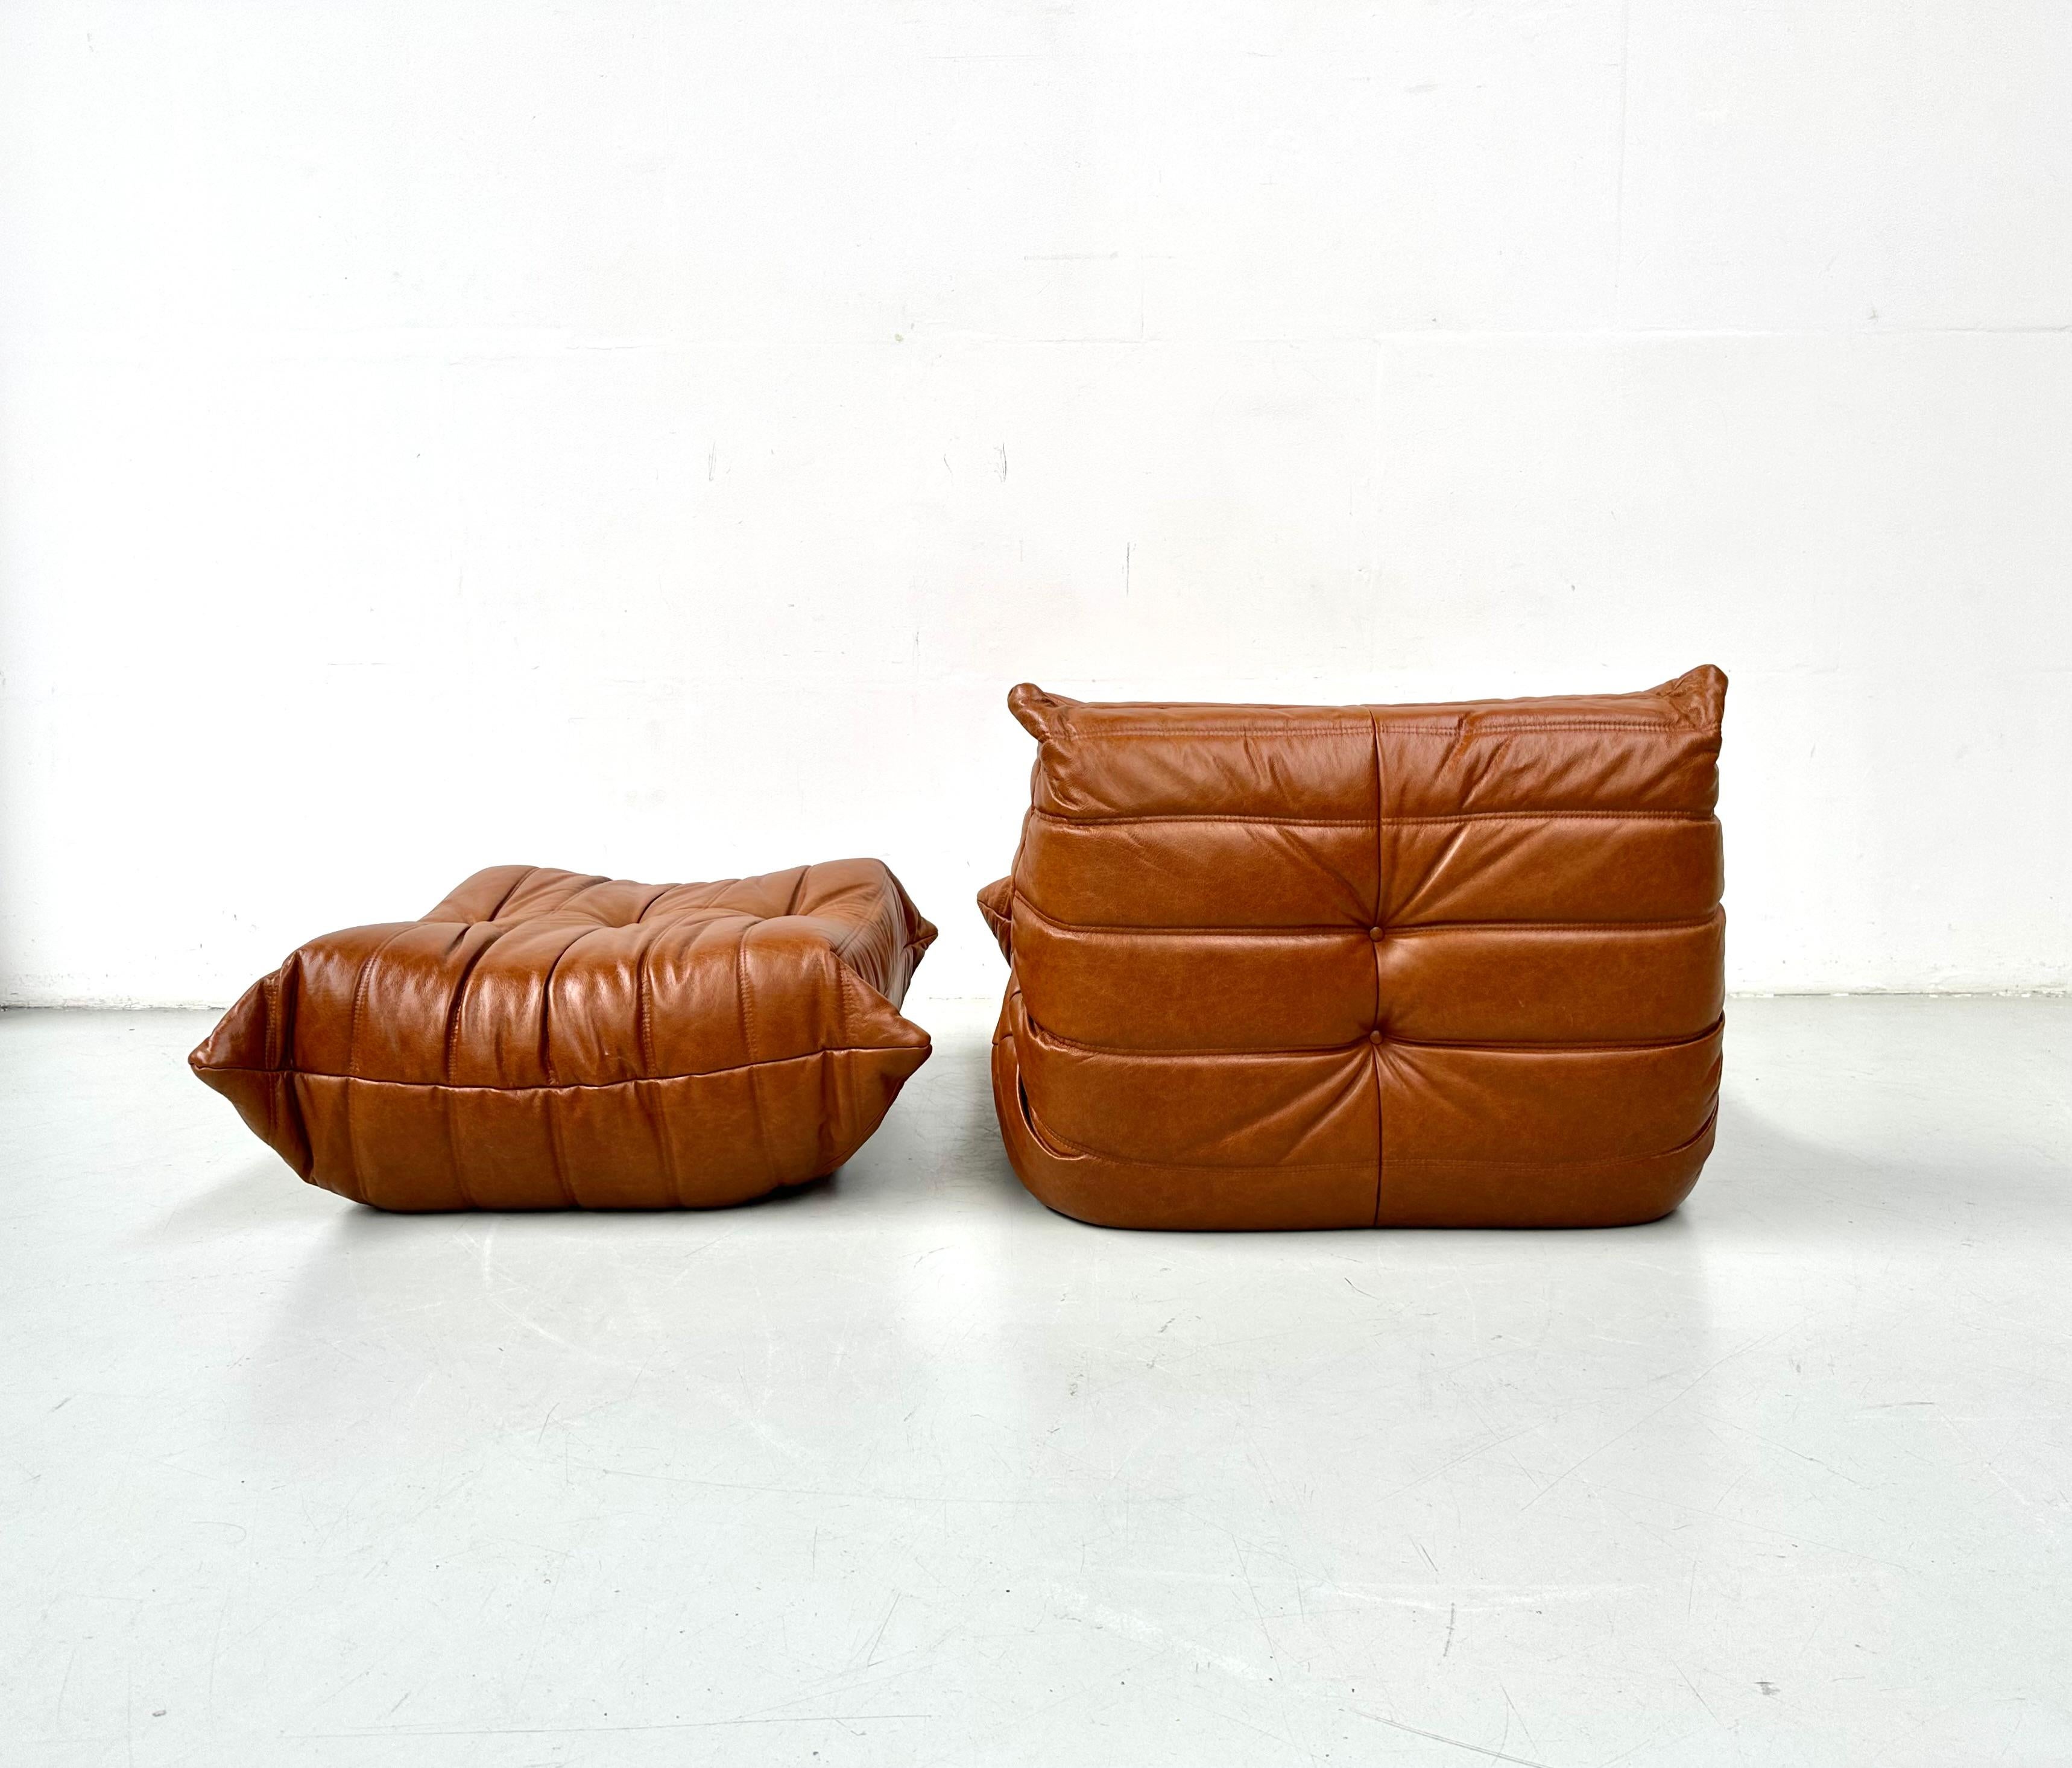 French Togo Chair and Ottoman in Cognac Leather by M. Ducaroy for Ligne Roset. For Sale 4